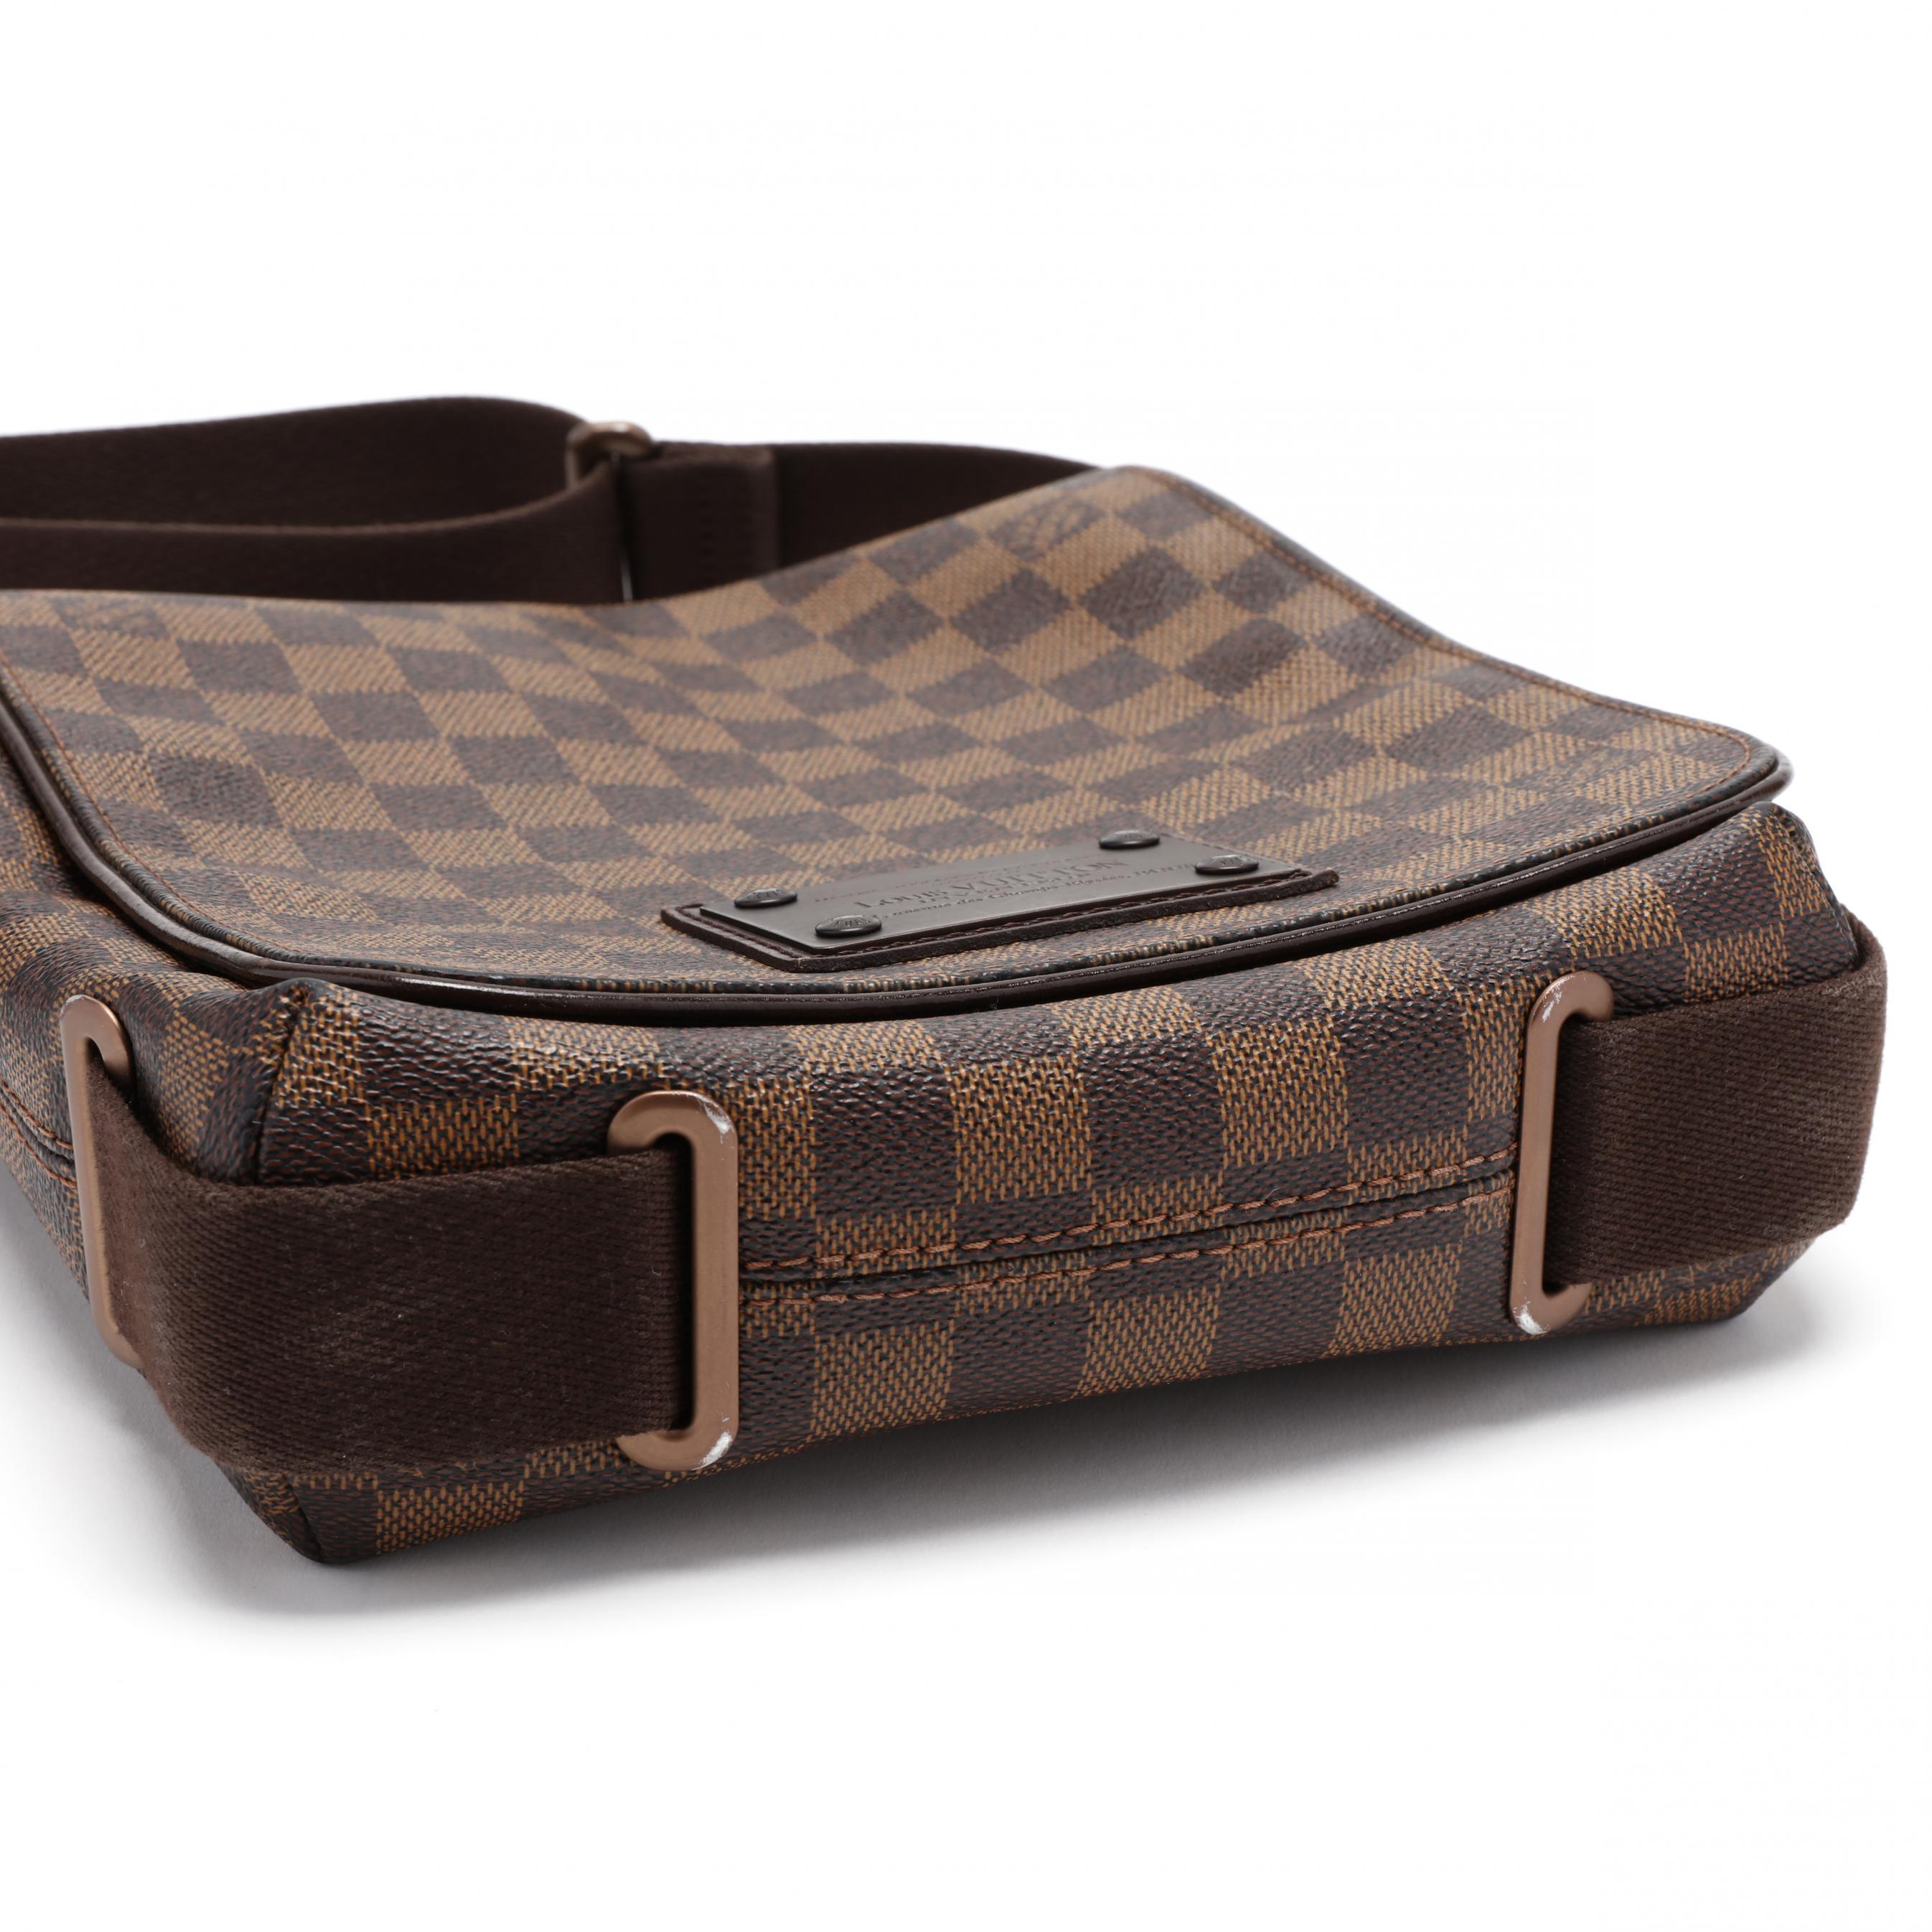 Sold at Auction: LOUIS VUITTON - BROOKLYN PM